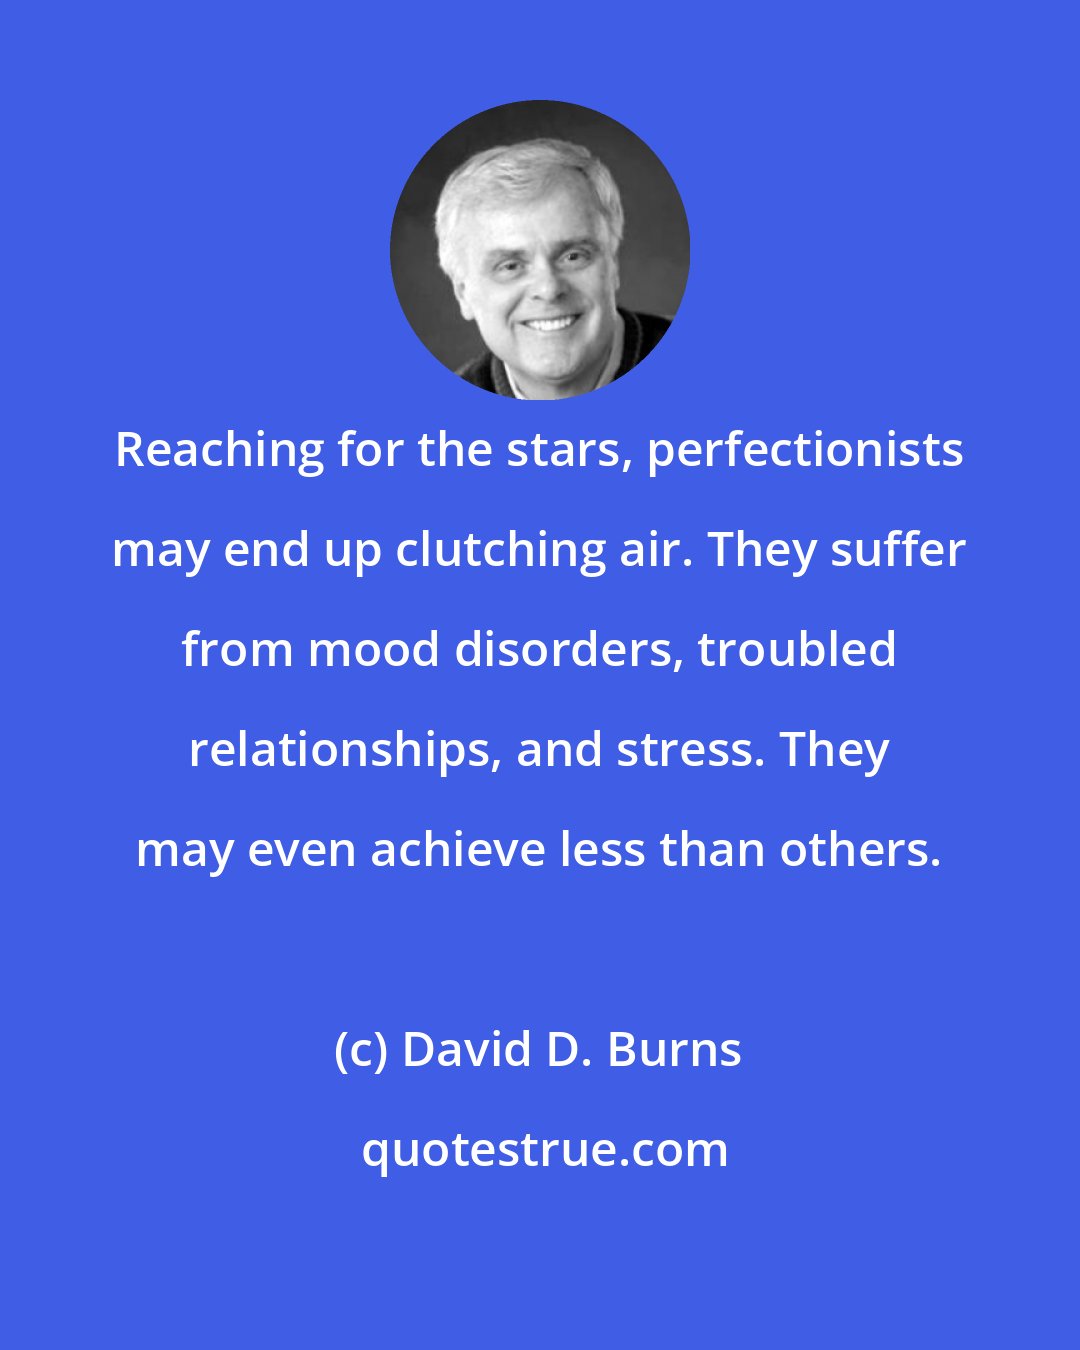 David D. Burns: Reaching for the stars, perfectionists may end up clutching air. They suffer from mood disorders, troubled relationships, and stress. They may even achieve less than others.